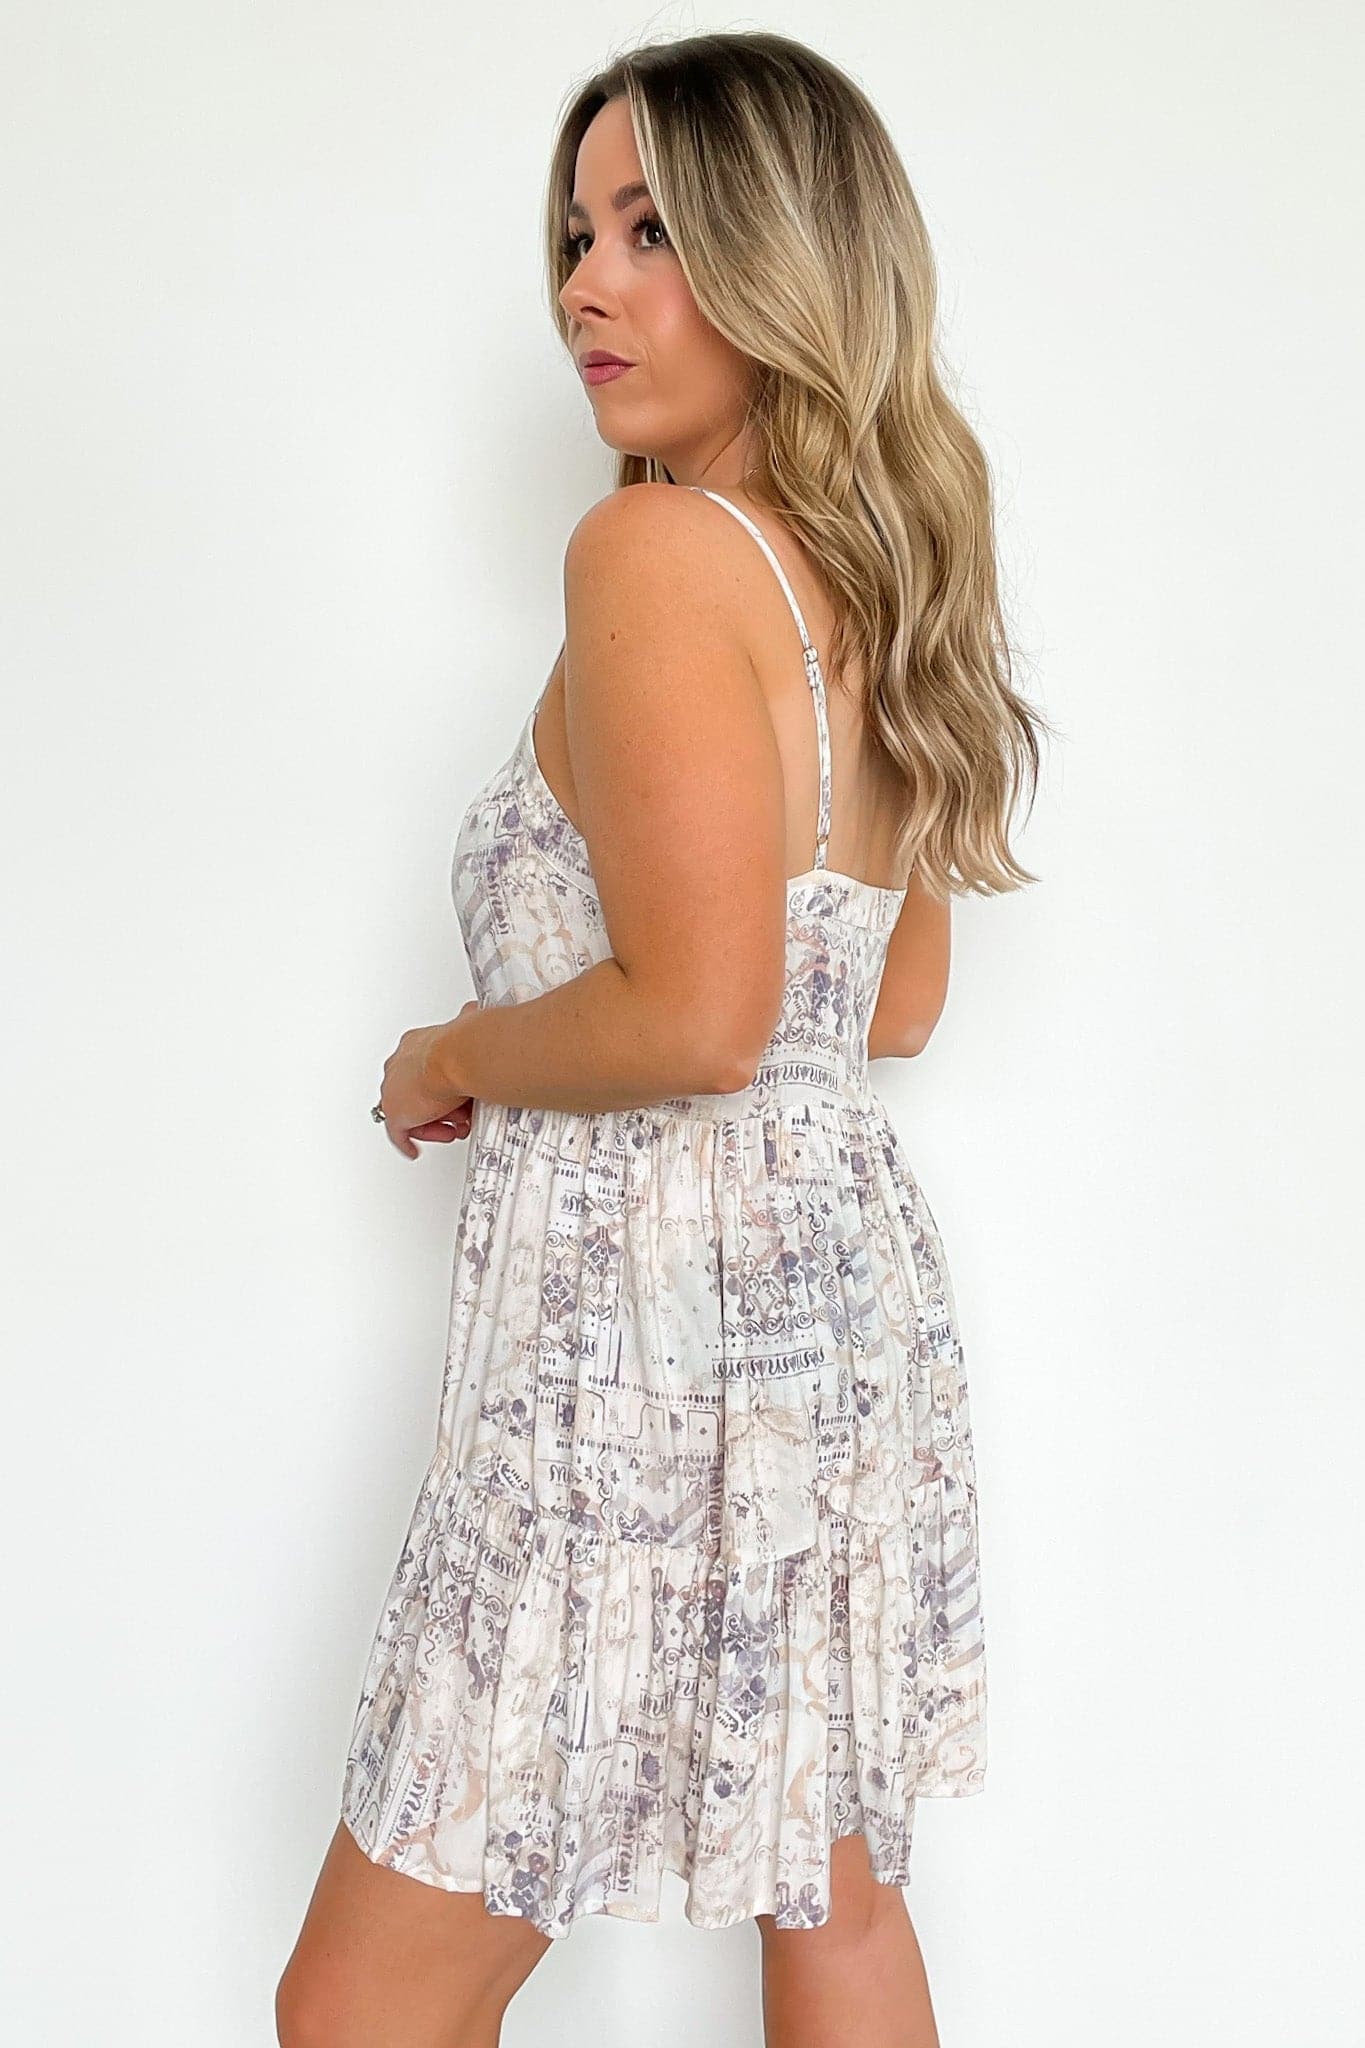  Eccentric Esscence Patchwork Print Tiered Dress - FINAL SALE - Madison and Mallory